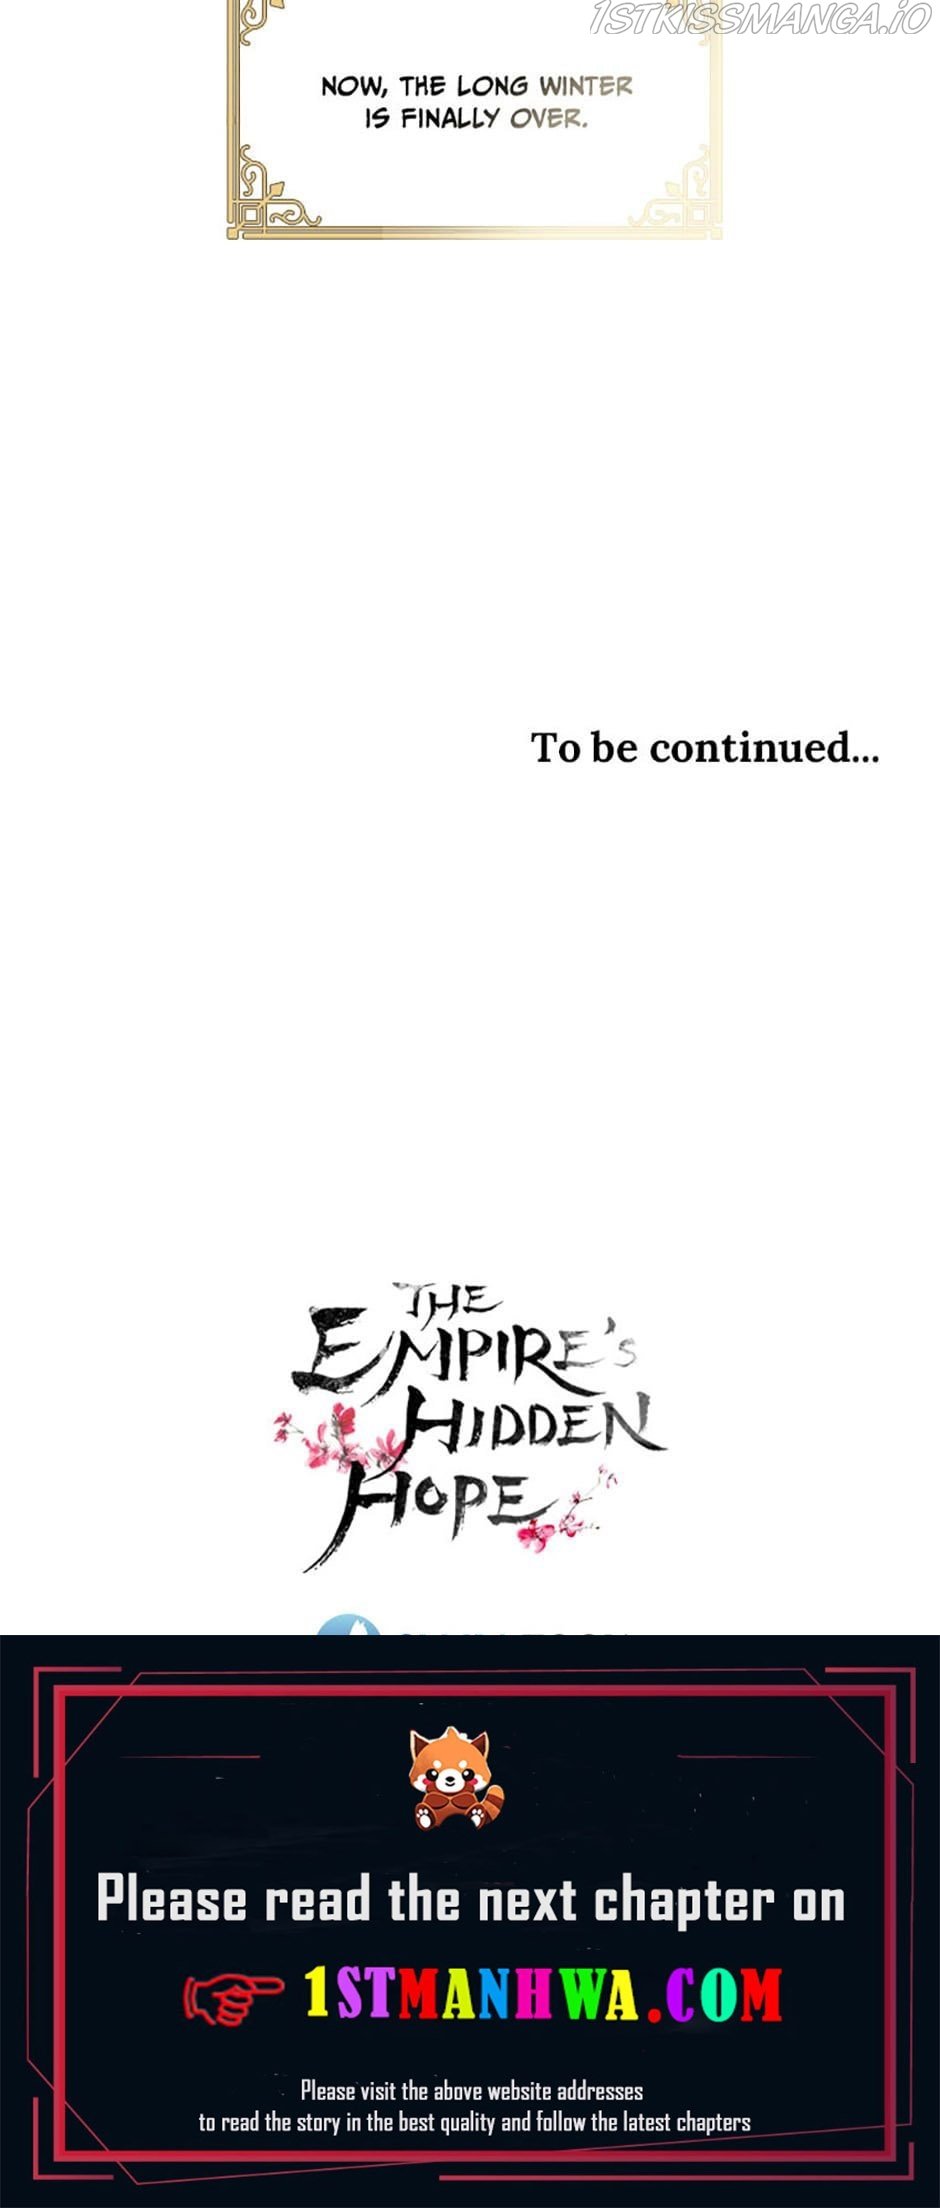 The Empire’s Hidden Hope chapter 58